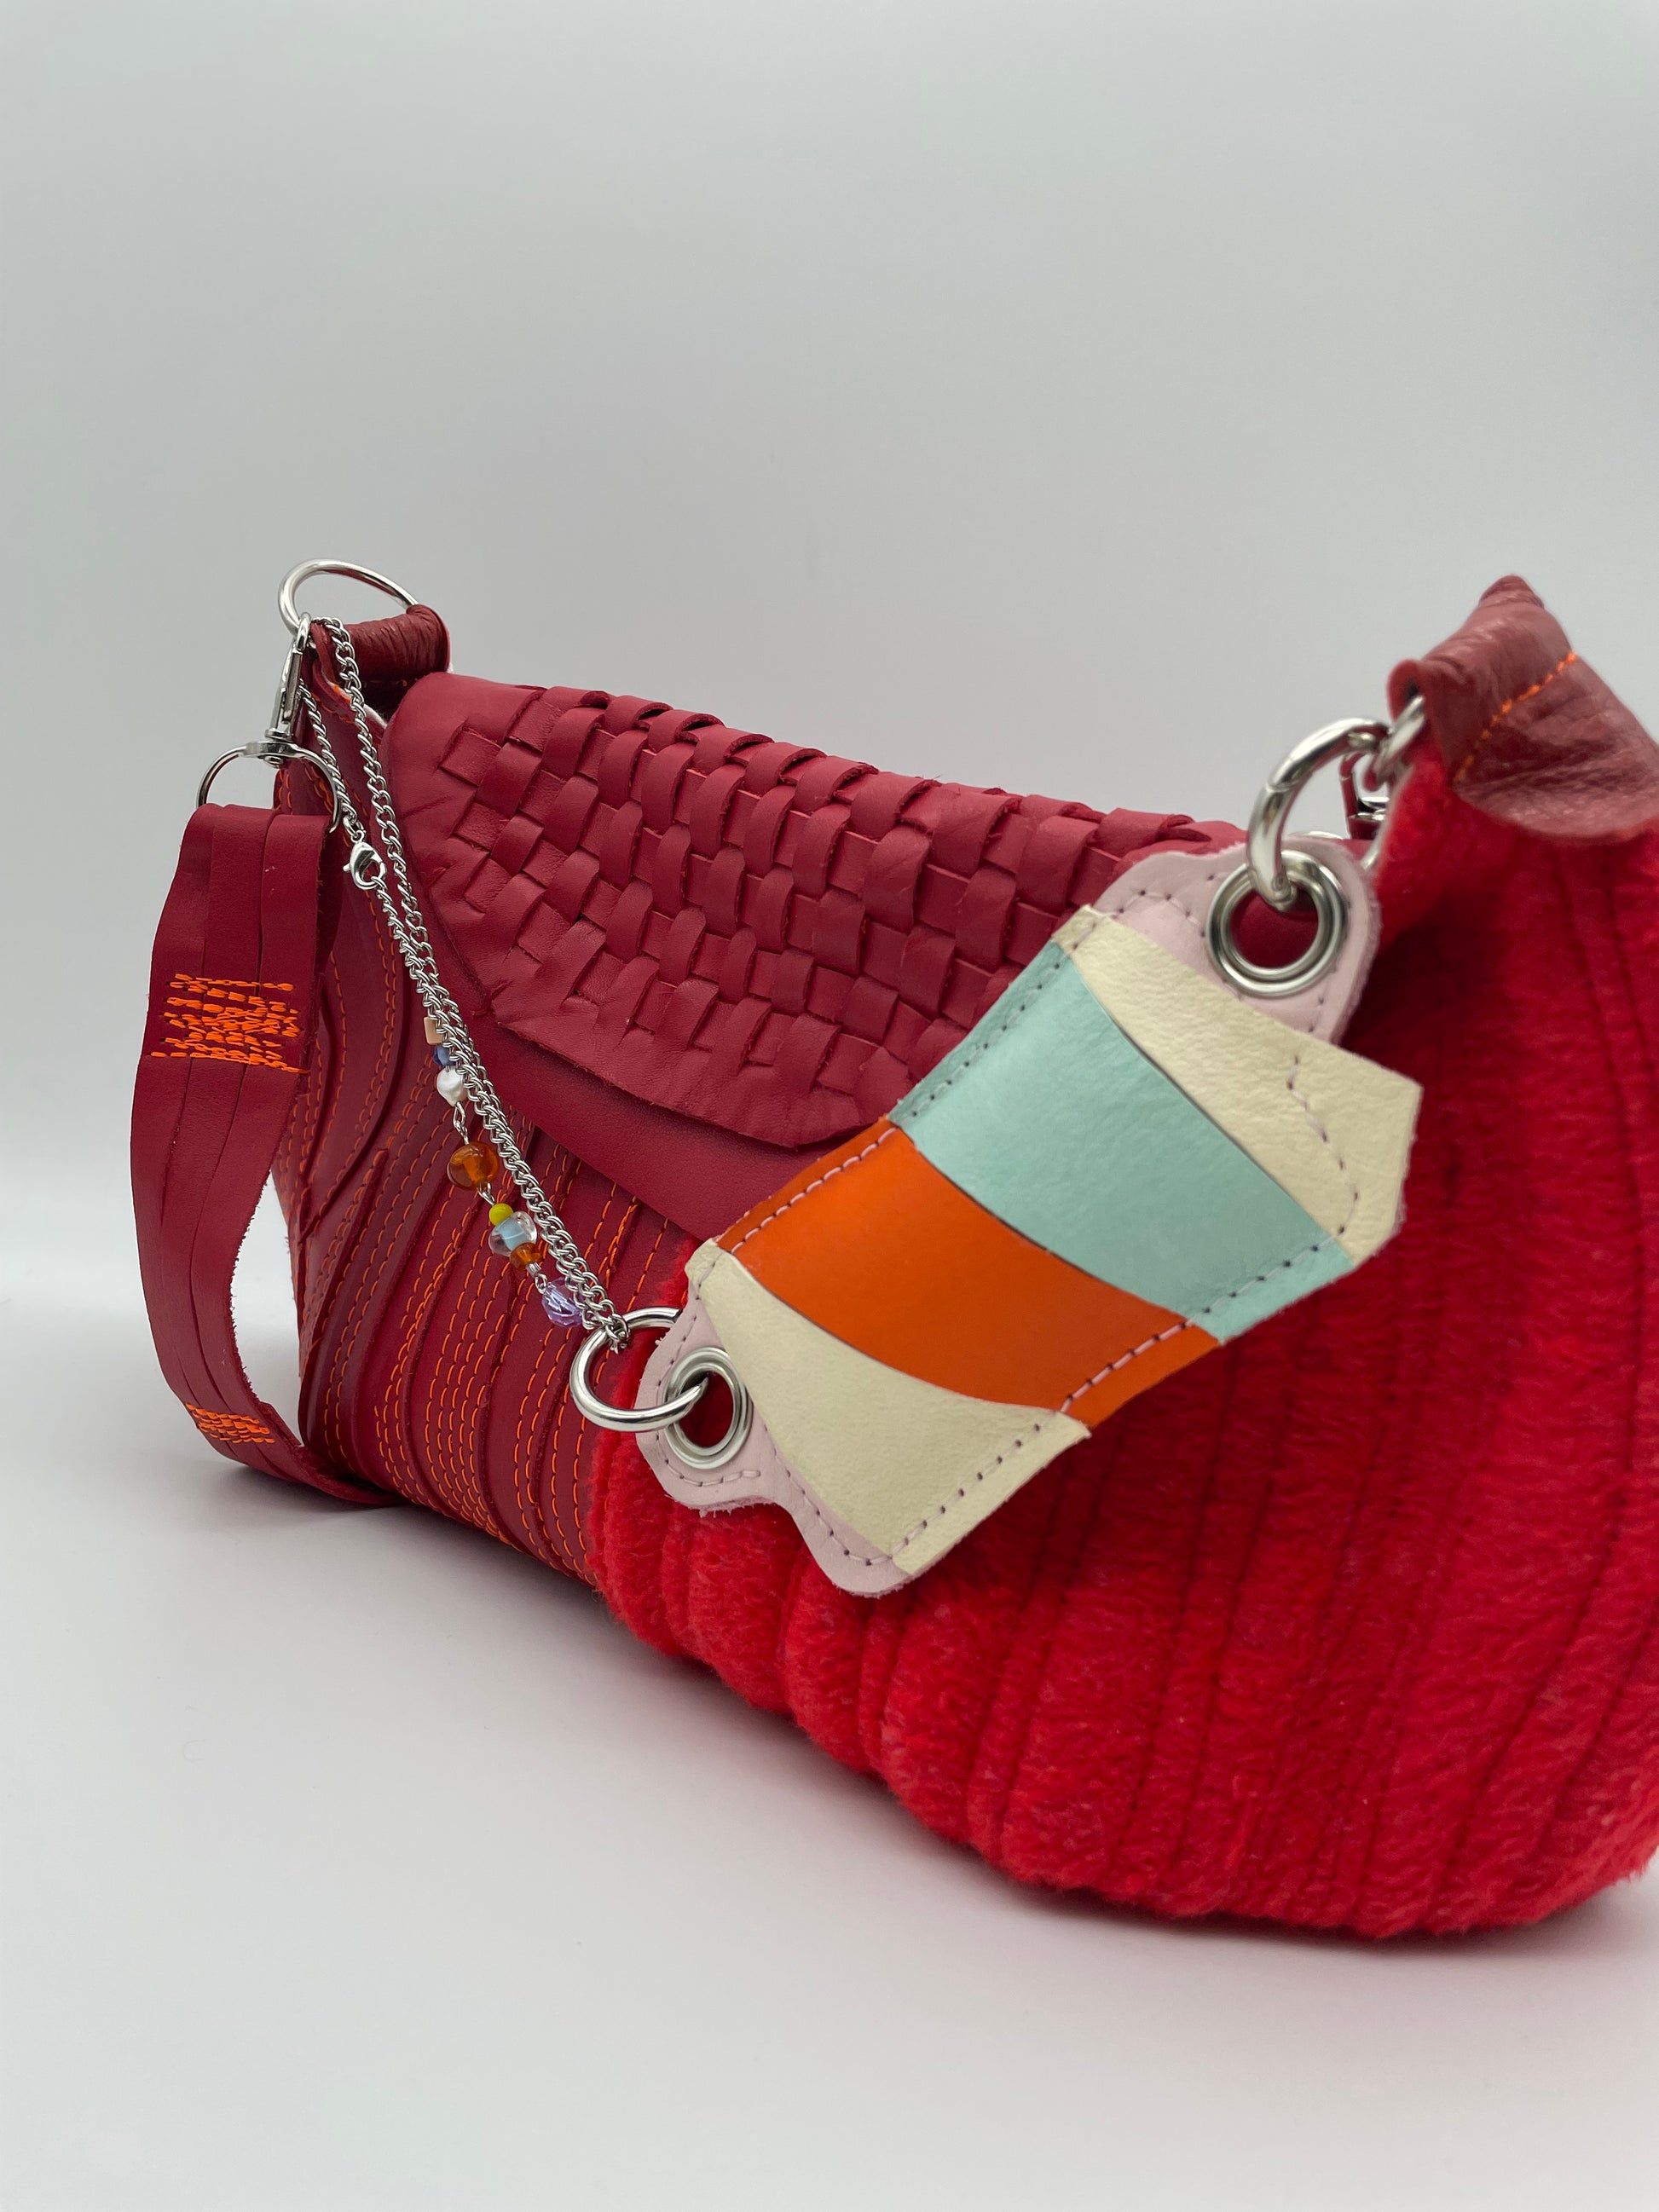 red bag upcycled upcycling bag charm retro stripes pink orange chain funky cute